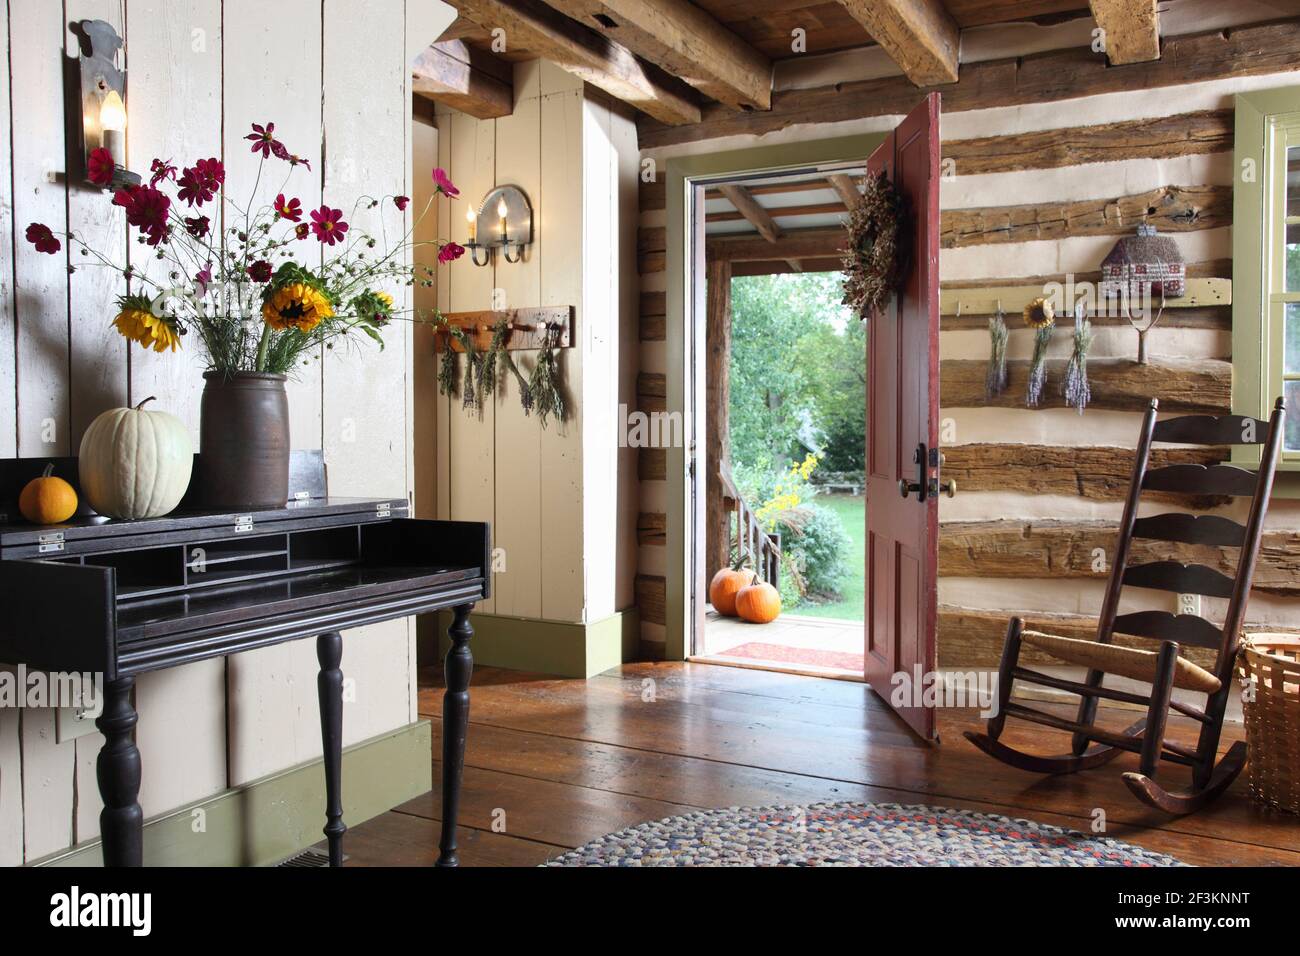 Front door and hall area of historic log cabin, with exposed logs and rocking chair. Also exposed beams, hardwood floors and fall decor and flowers. Stock Photo